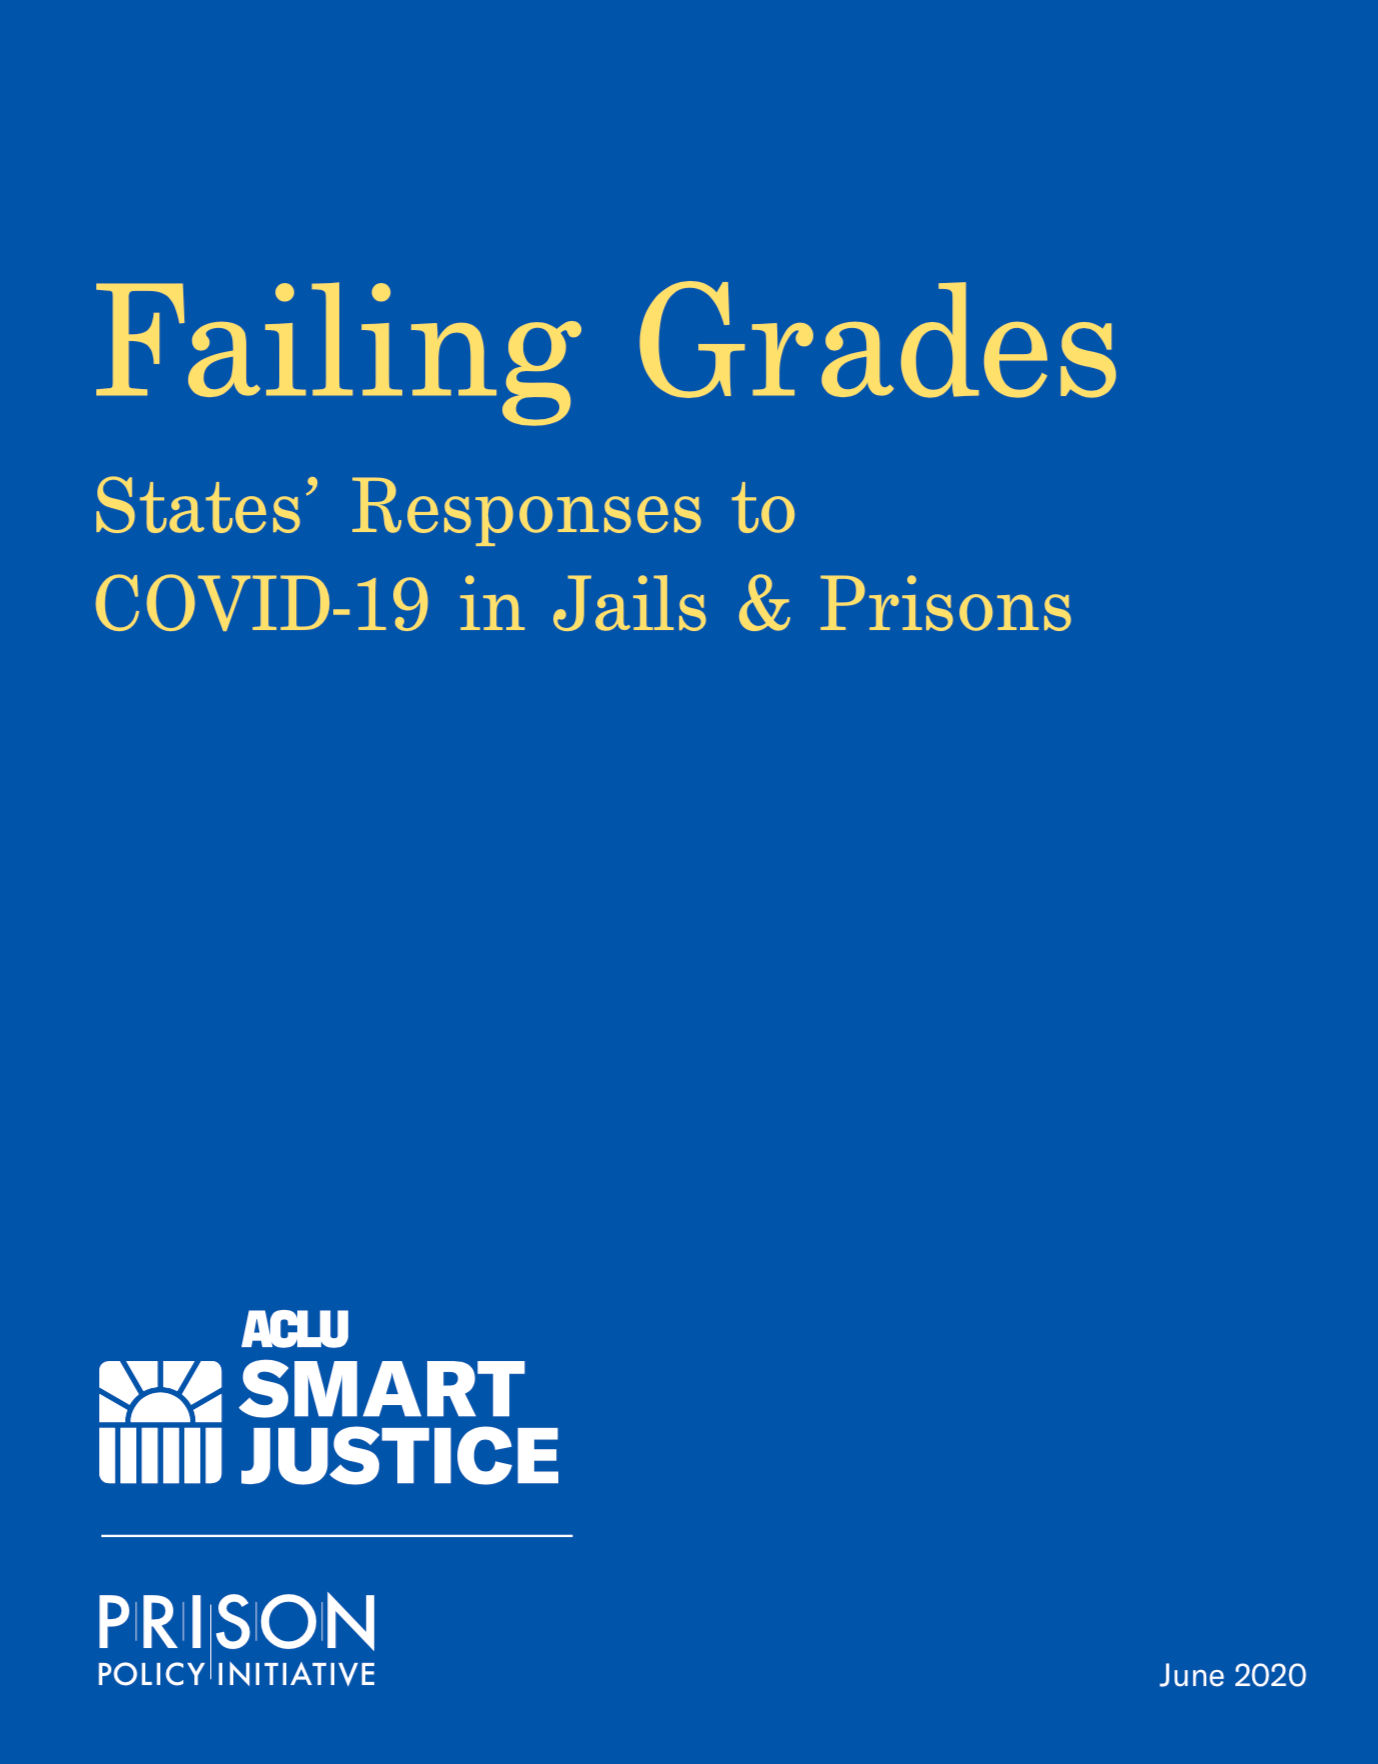 Report Title: Failing Grades States' Responses to COVID-19 in Jails & Prisons